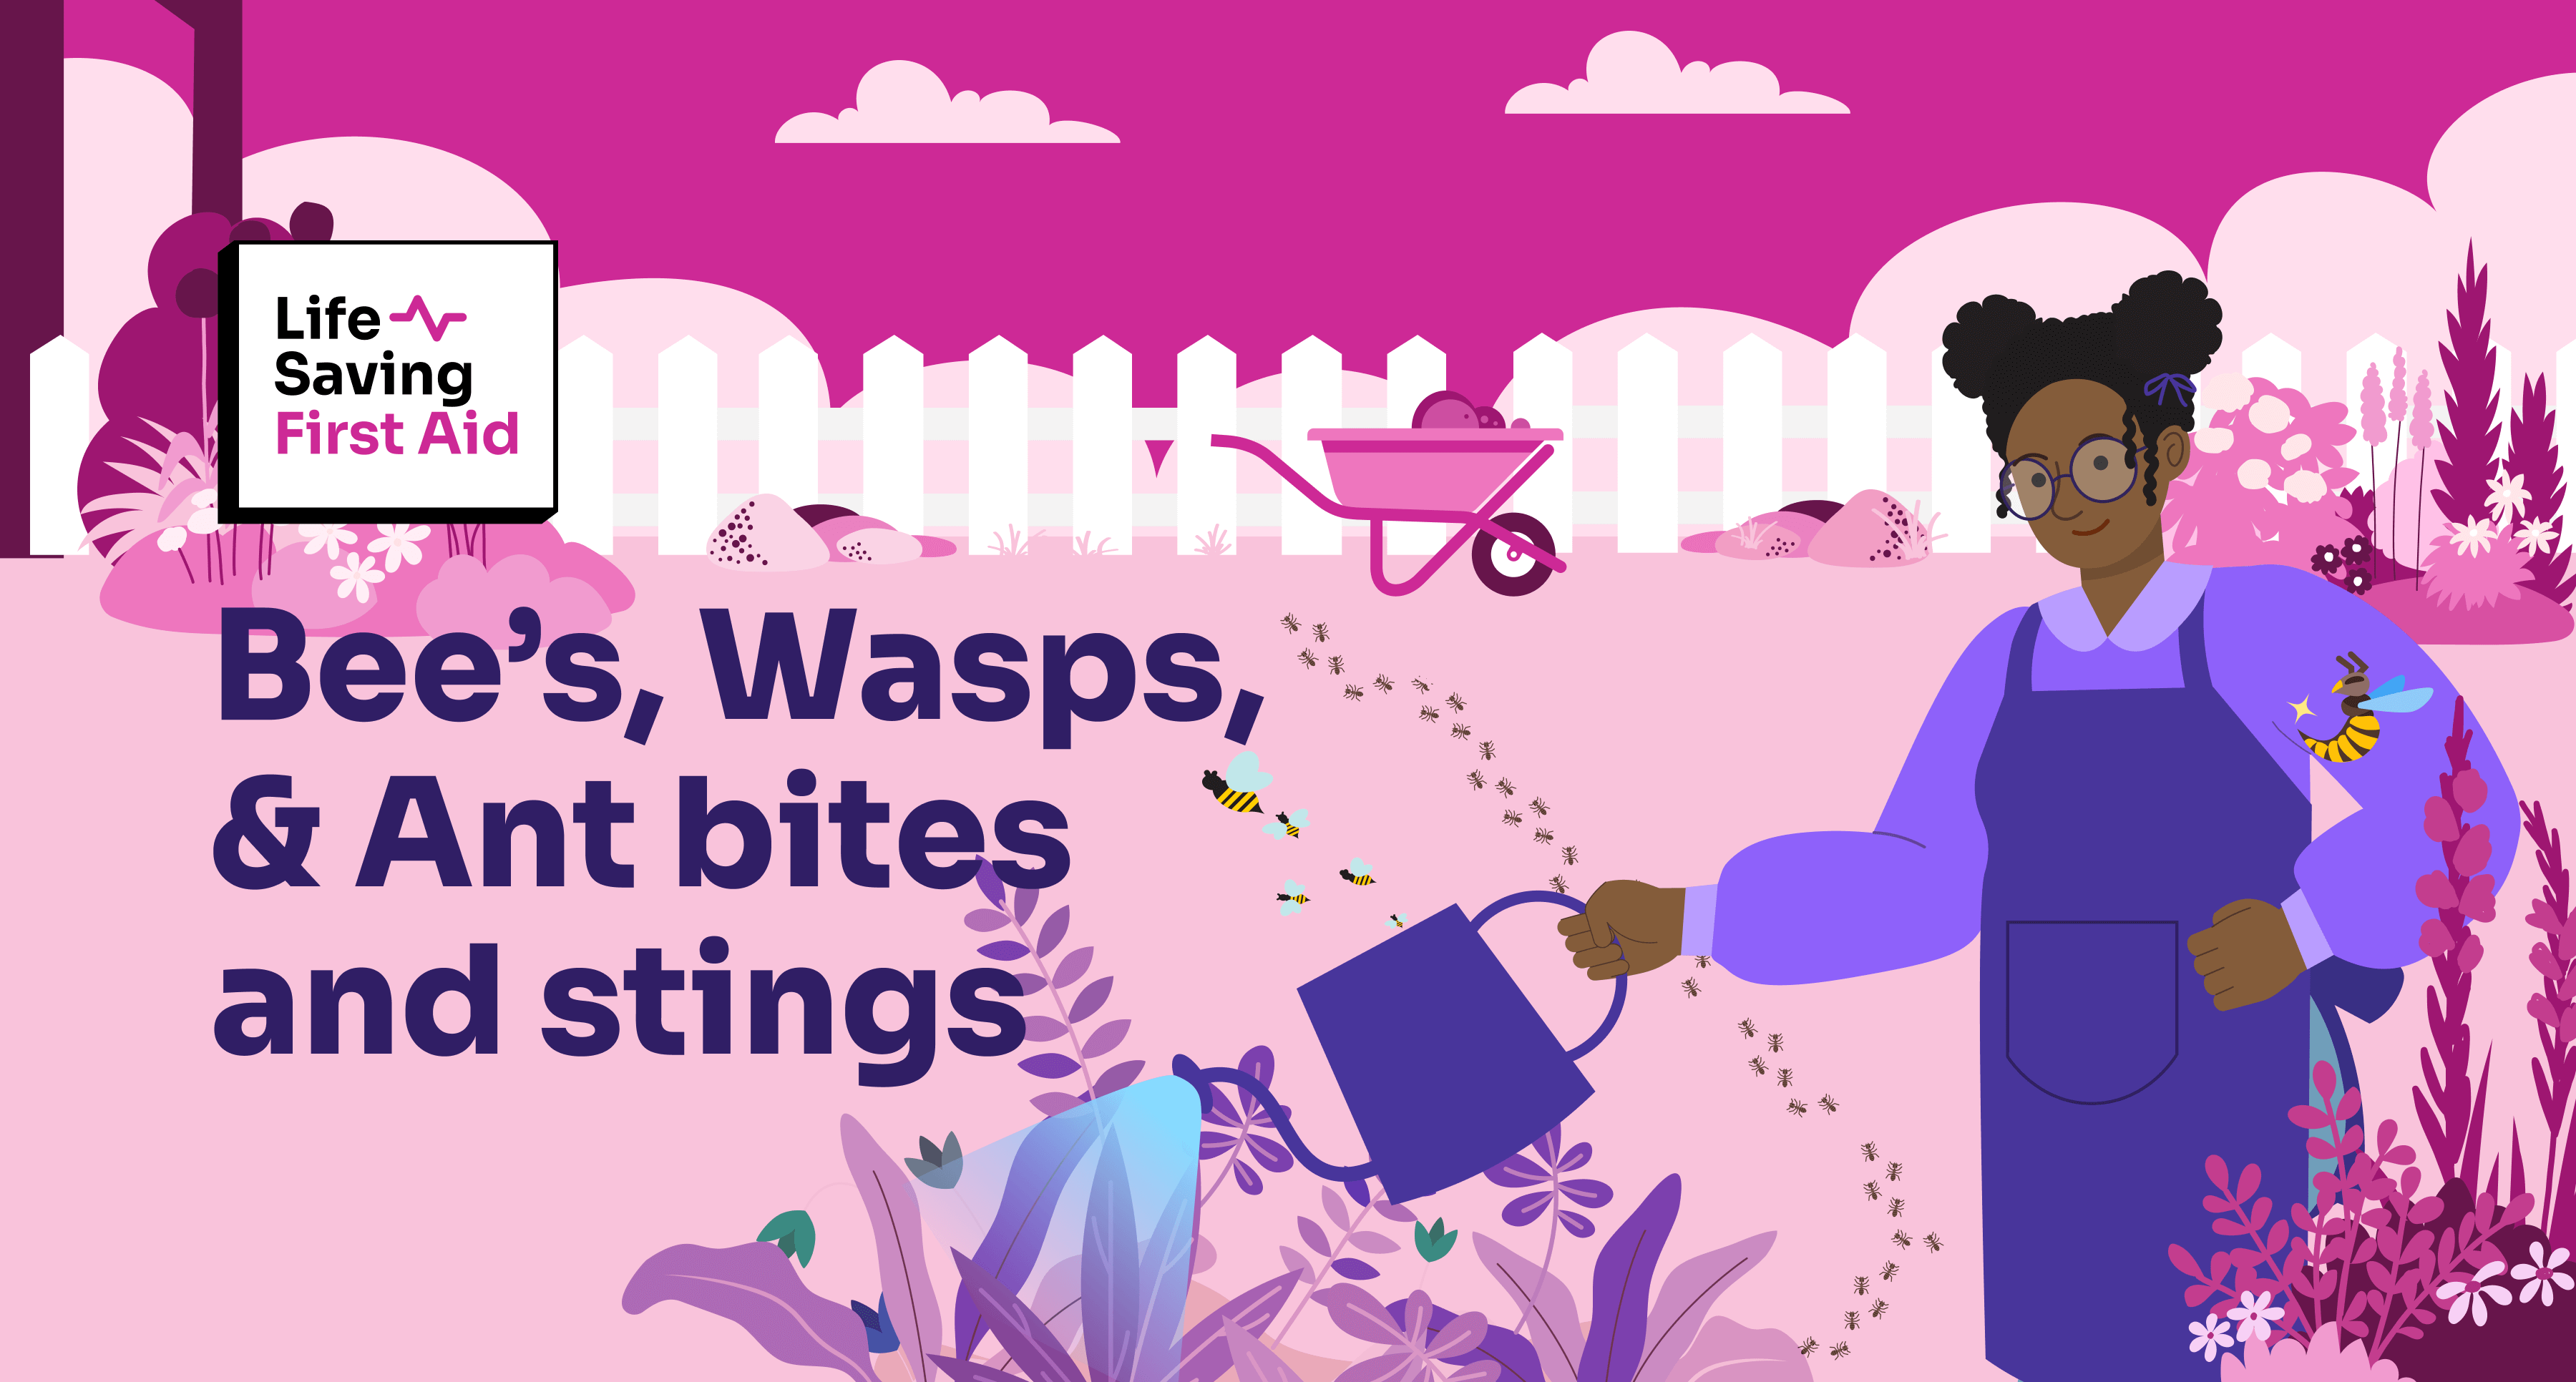 Image of a person watering their flowers in the garden while bees, wasps and ants roam around the garden The title next to it says "Bee’s, Wasps, & Ant bites and stings" followed by Life Saving First Aid logo